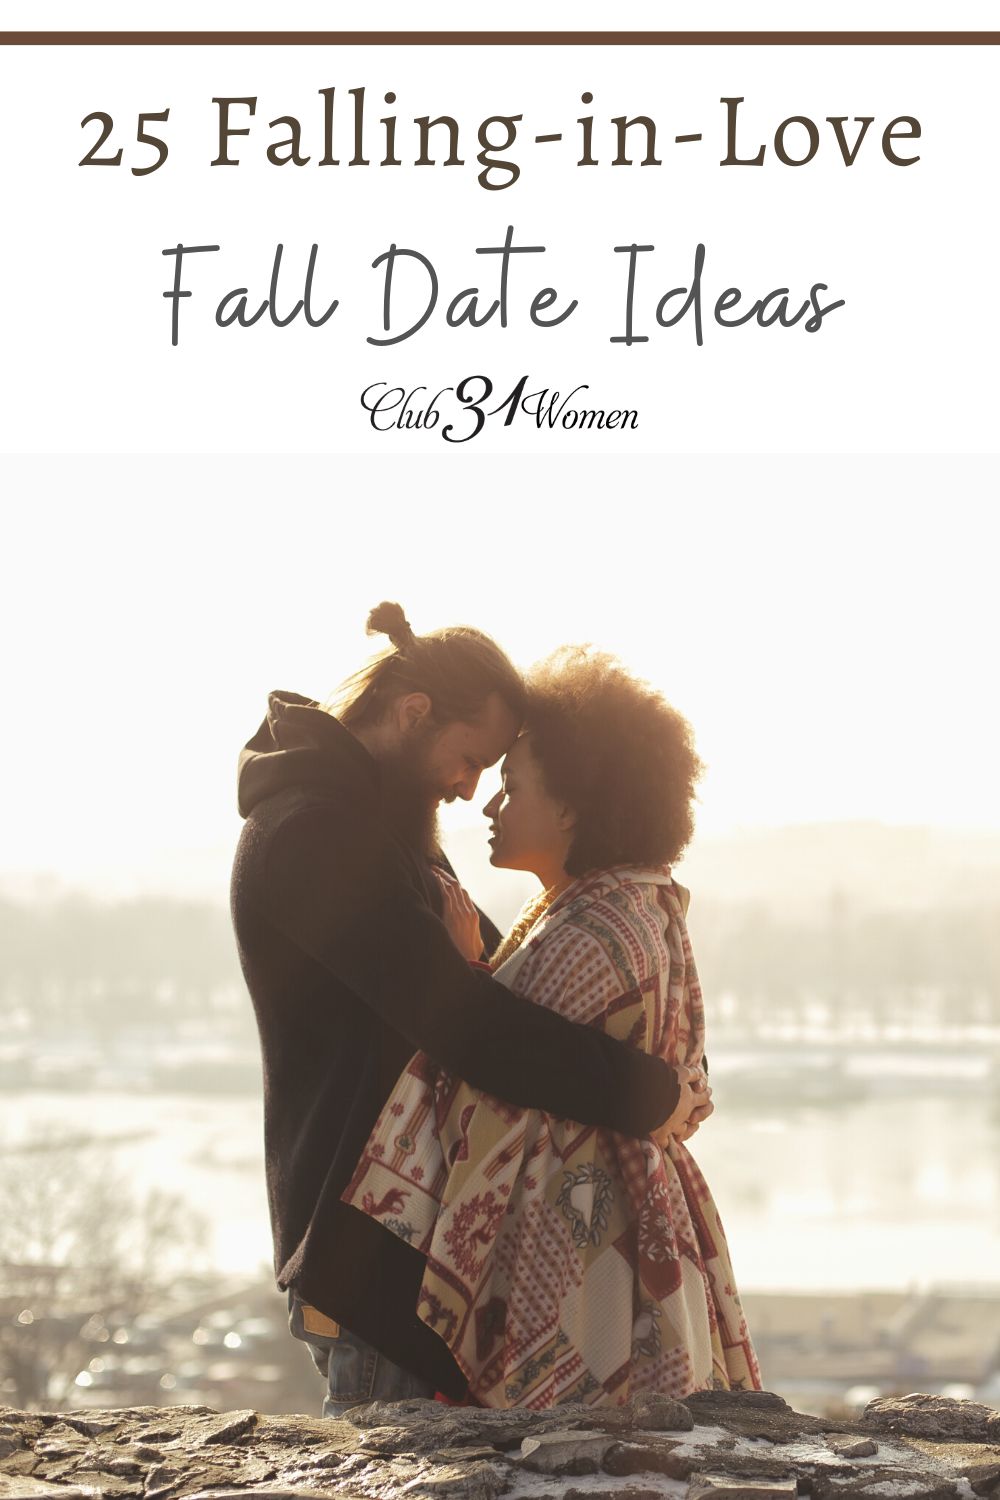 Ready to fall-in-love with each other all over again? Here are 25 of my best fall date ideas for you and your spouse! via @Club31Women